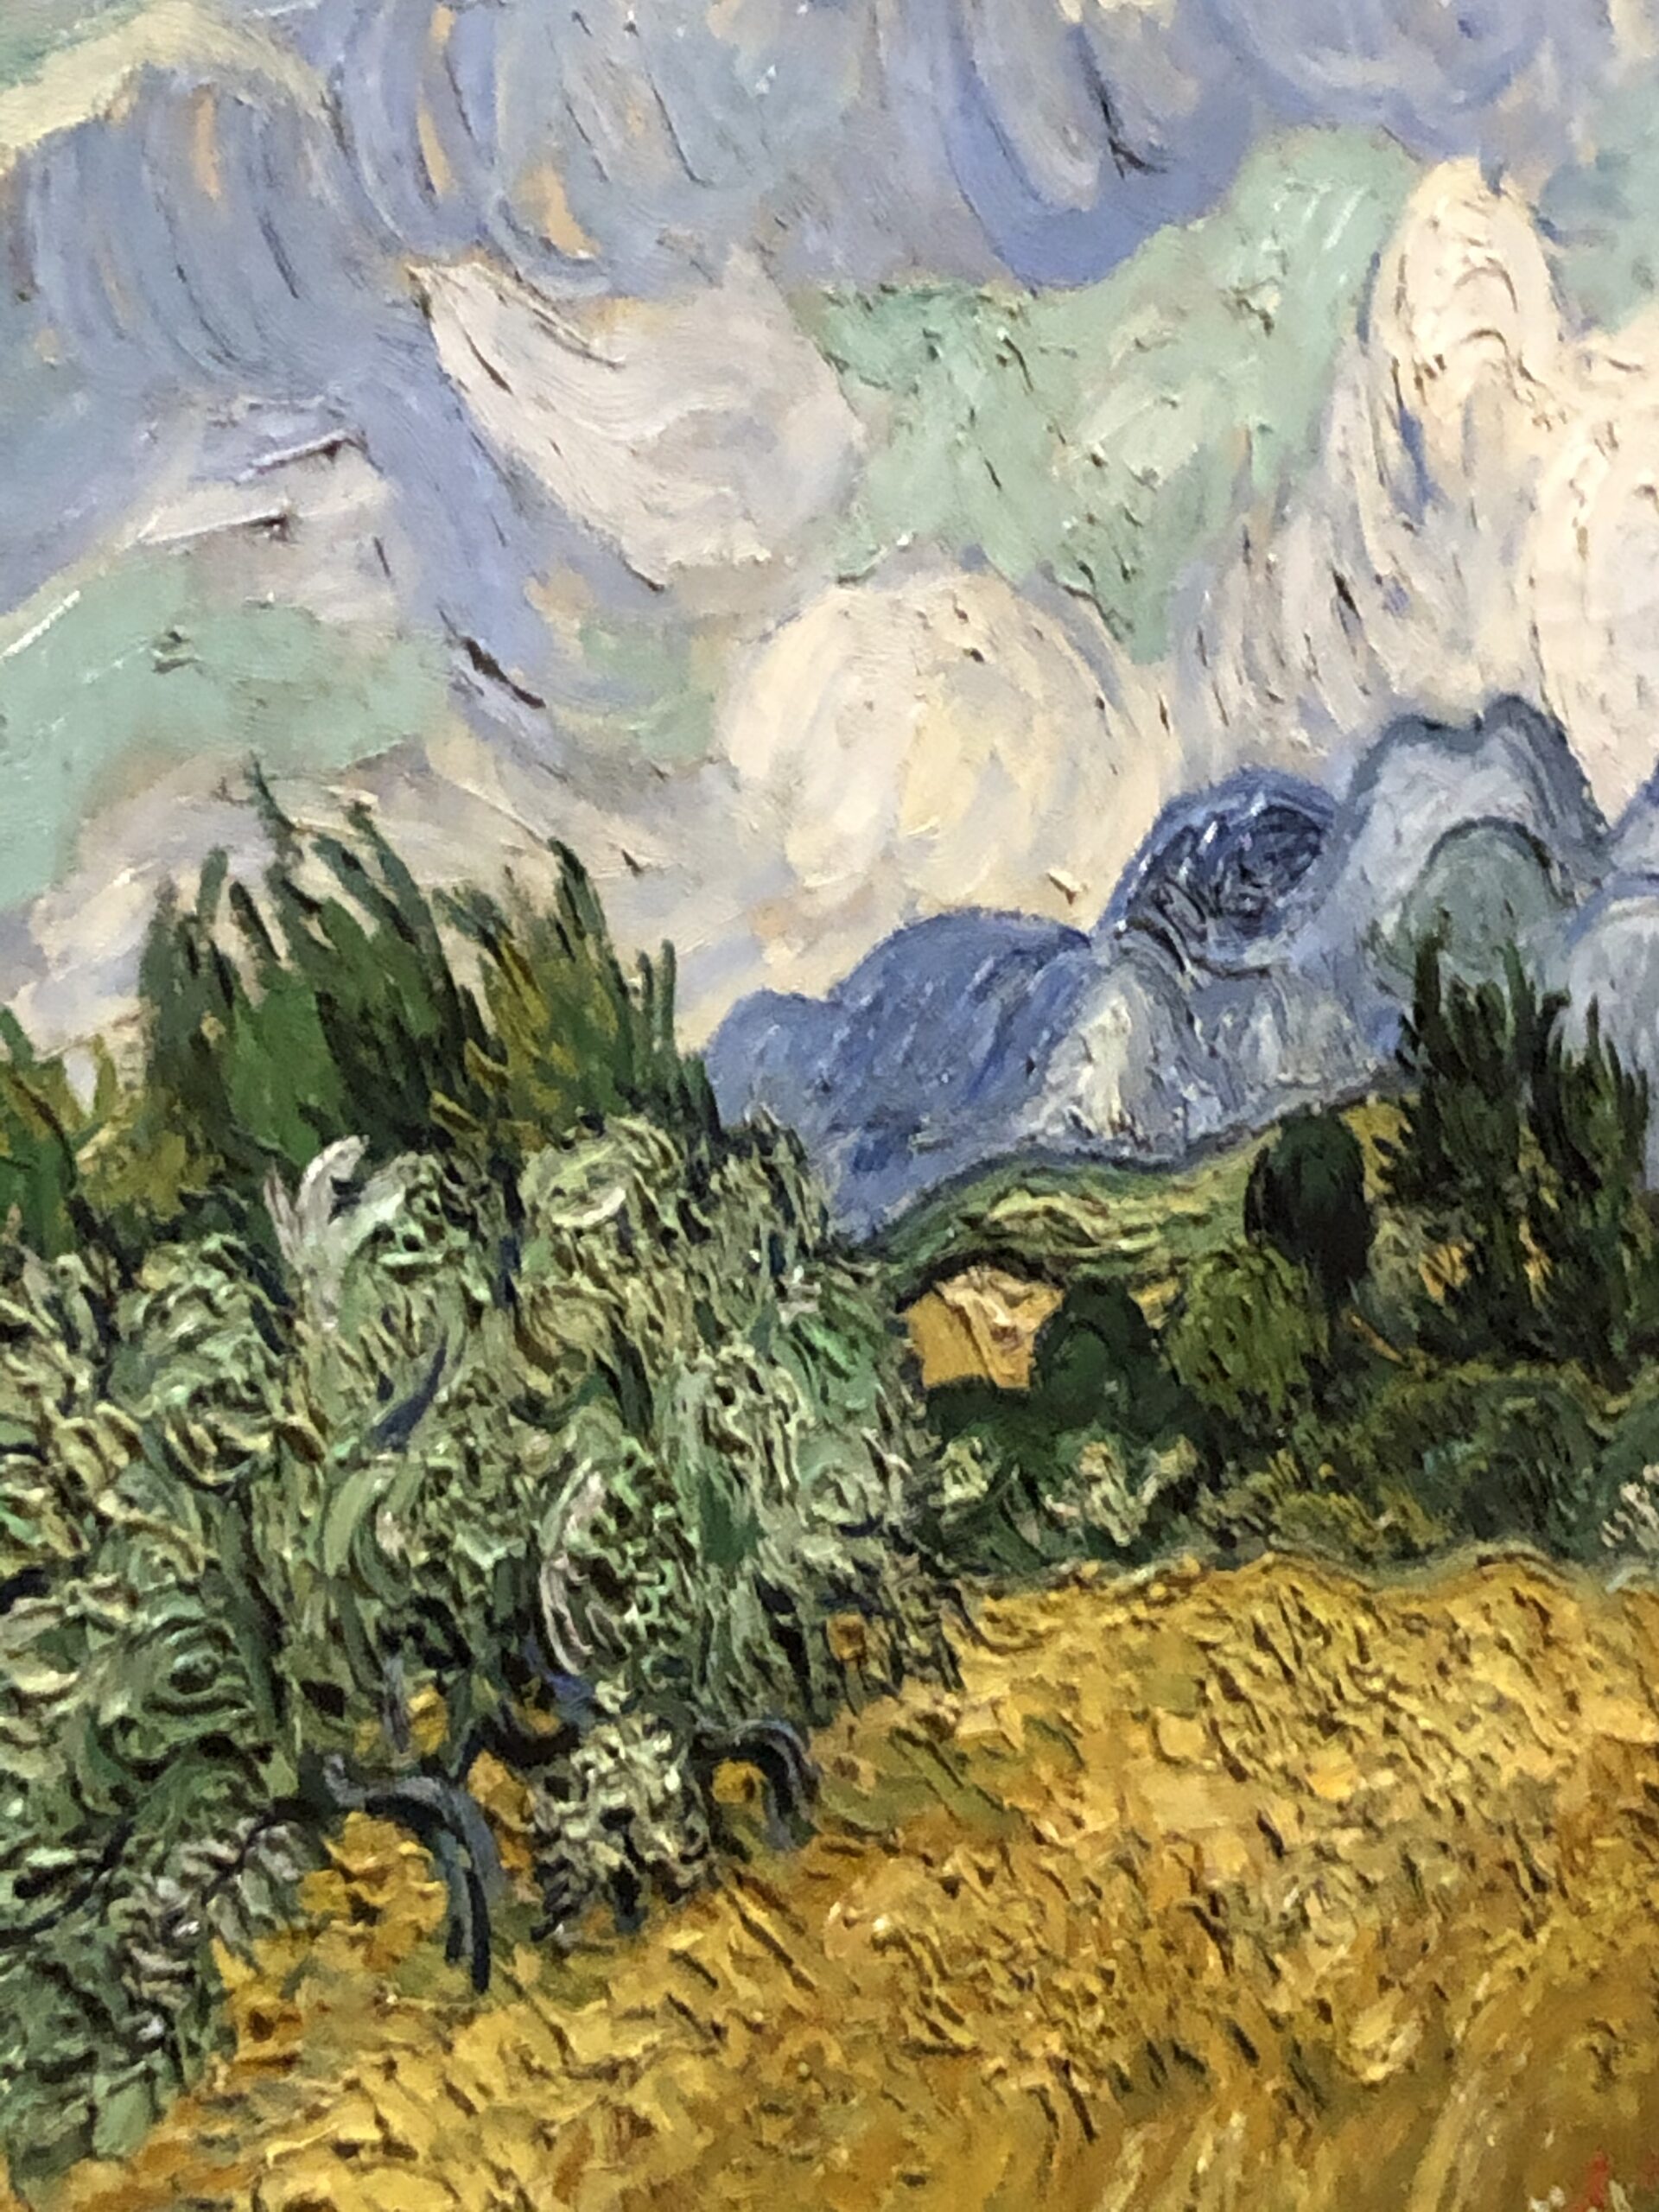 Have You Ever Wanted to Touch a Van Gogh Painting? Well, Now You Can, With  the Help of 3-D Printing Technology